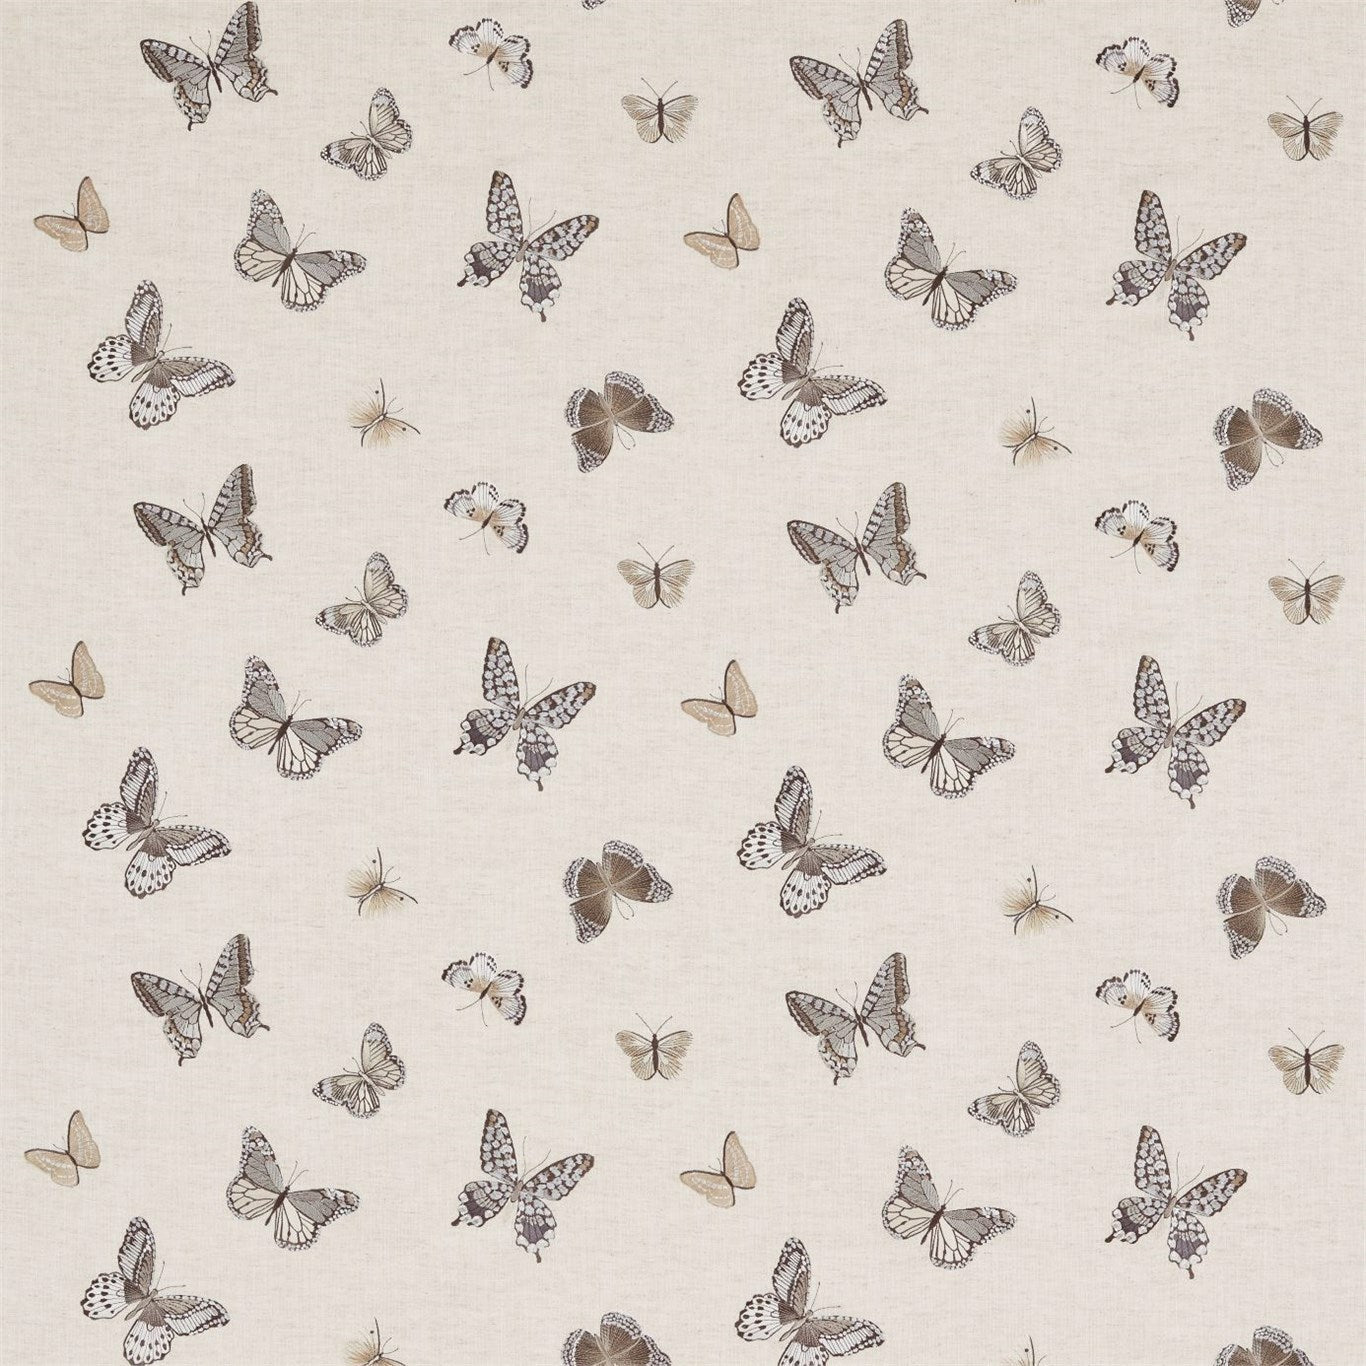 Butterfly Embroidery Fabric by Sanderson - DWOW235600 - Charcoal/Walnut